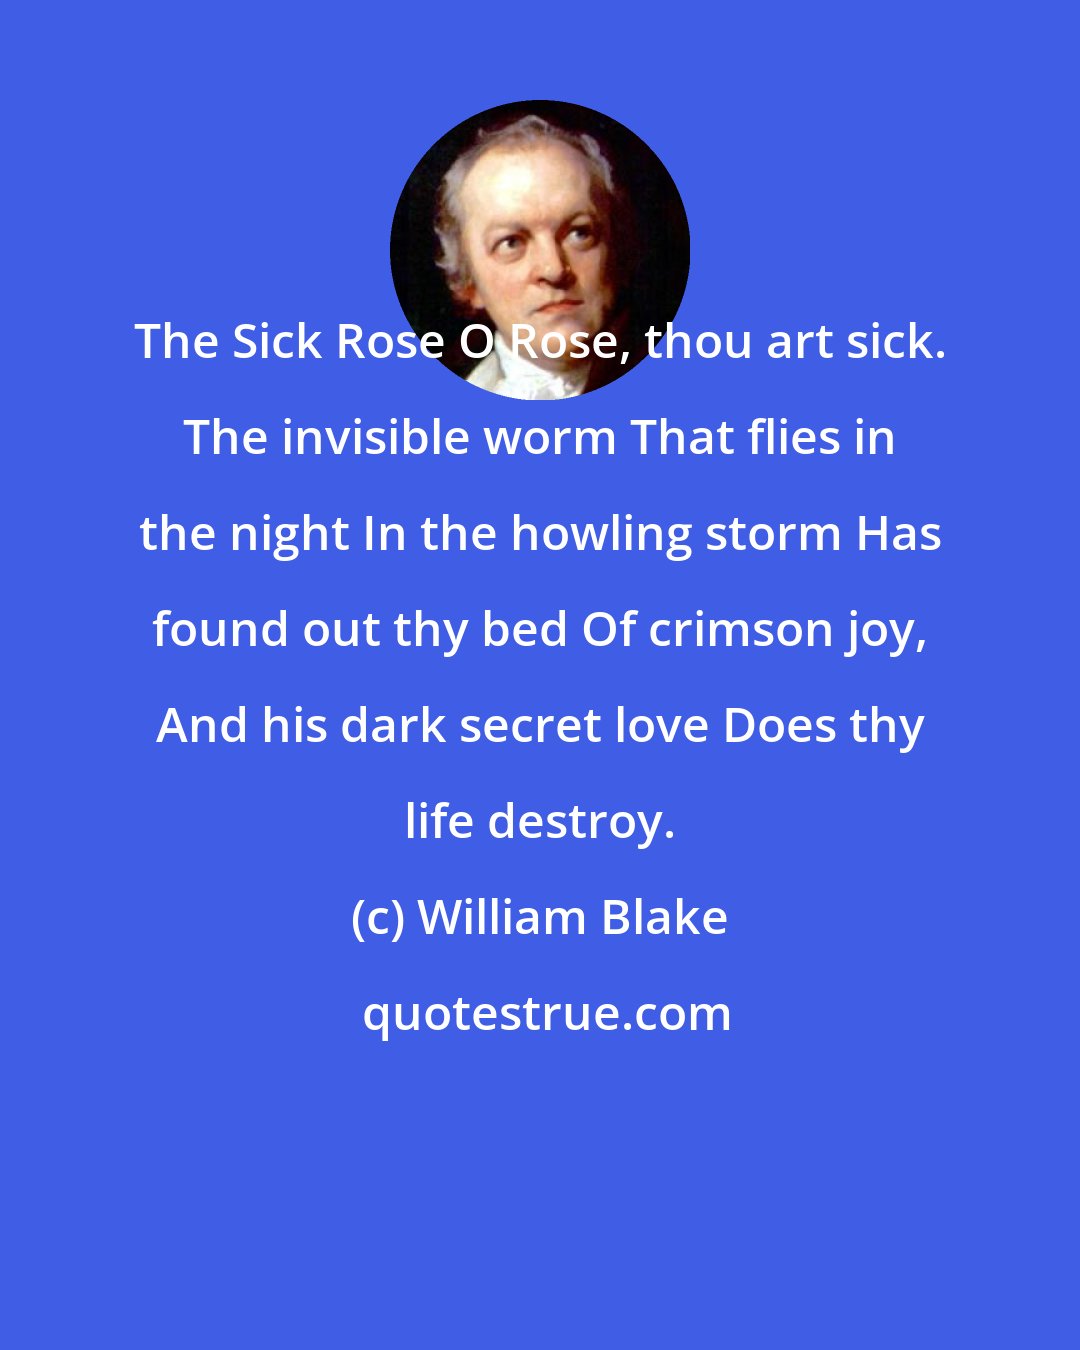 William Blake: The Sick Rose O Rose, thou art sick. The invisible worm That flies in the night In the howling storm Has found out thy bed Of crimson joy, And his dark secret love Does thy life destroy.